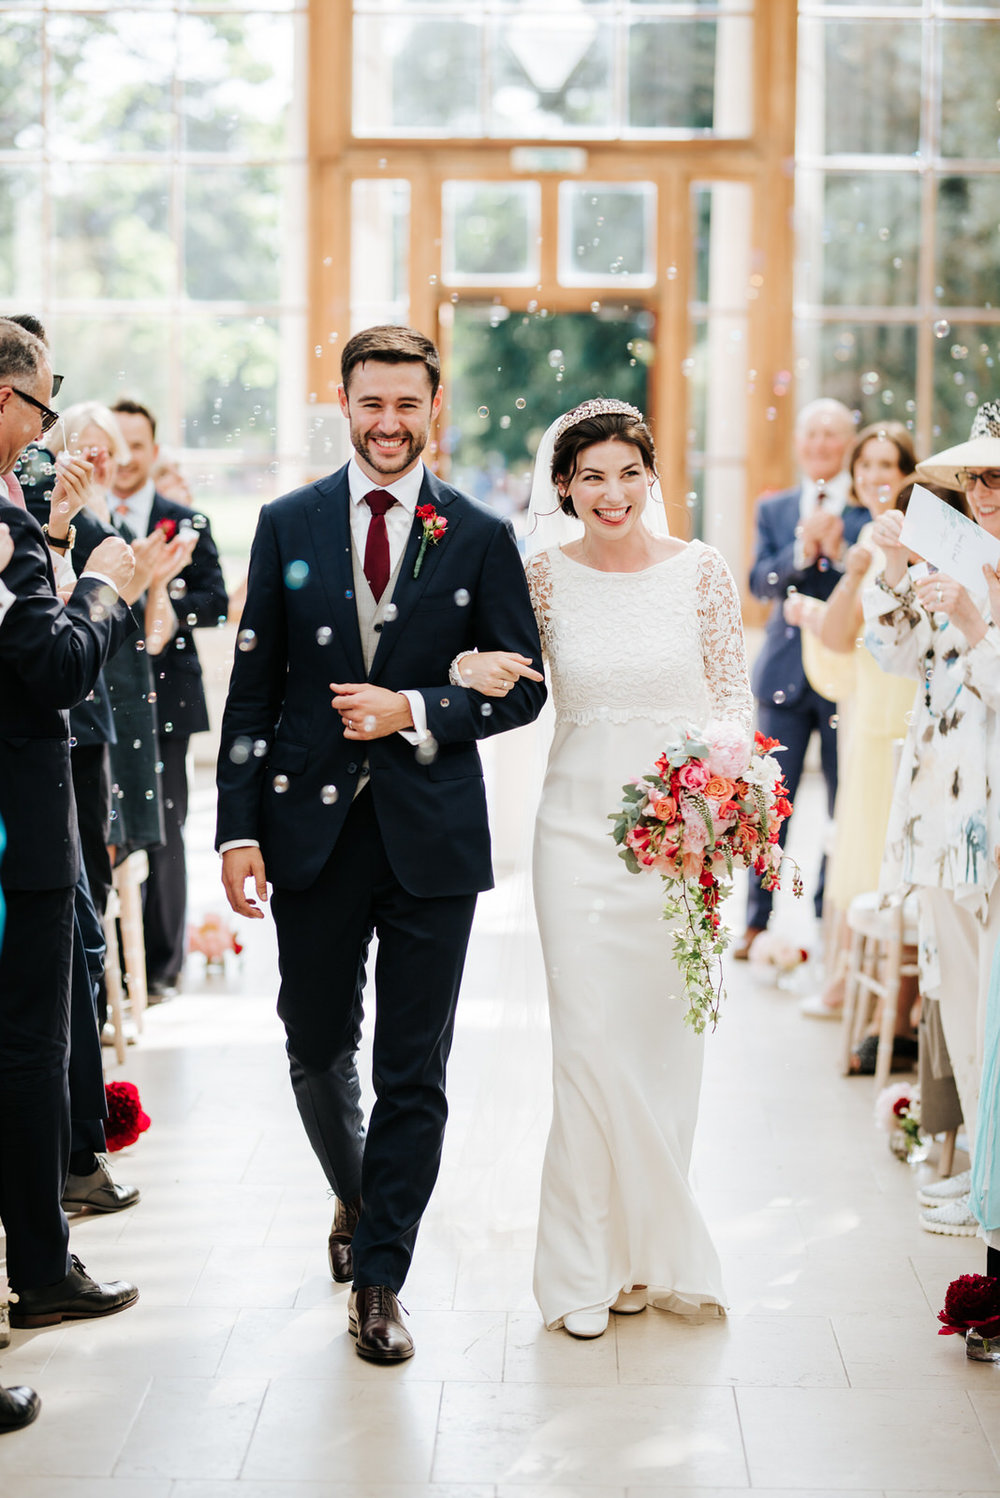  Bride and groom walk back down the aisle as a married couple while guests blow bubbles at them 